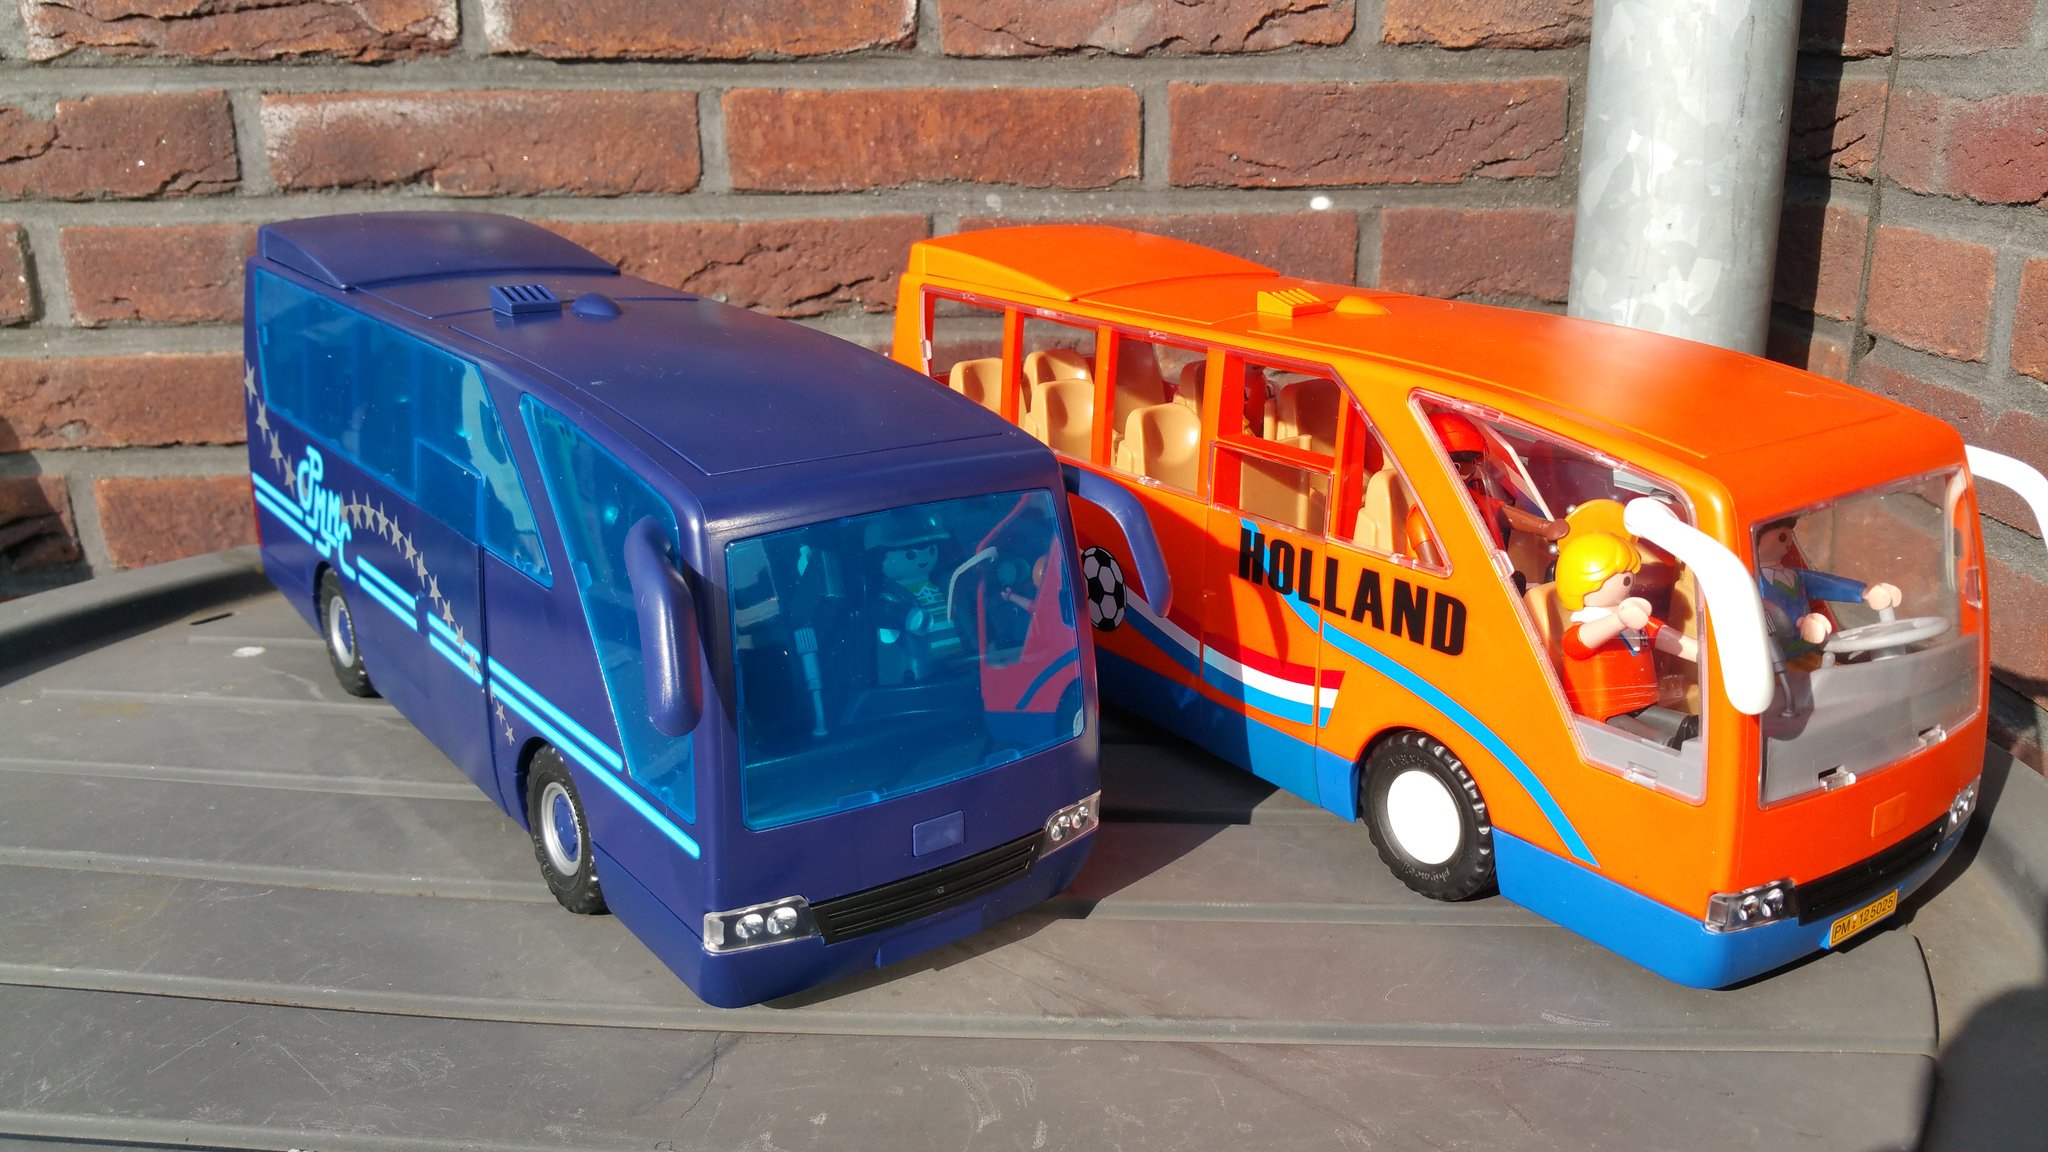 Ledig Anmeldelse udluftning PlayMoto Toys on Twitter: "Finally gotten around to #unpacking some boxes: # funpark sets,buses,rescue dogs #Playmobil #PlayMoto_collection  https://t.co/7bquOQ64Q1" / Twitter